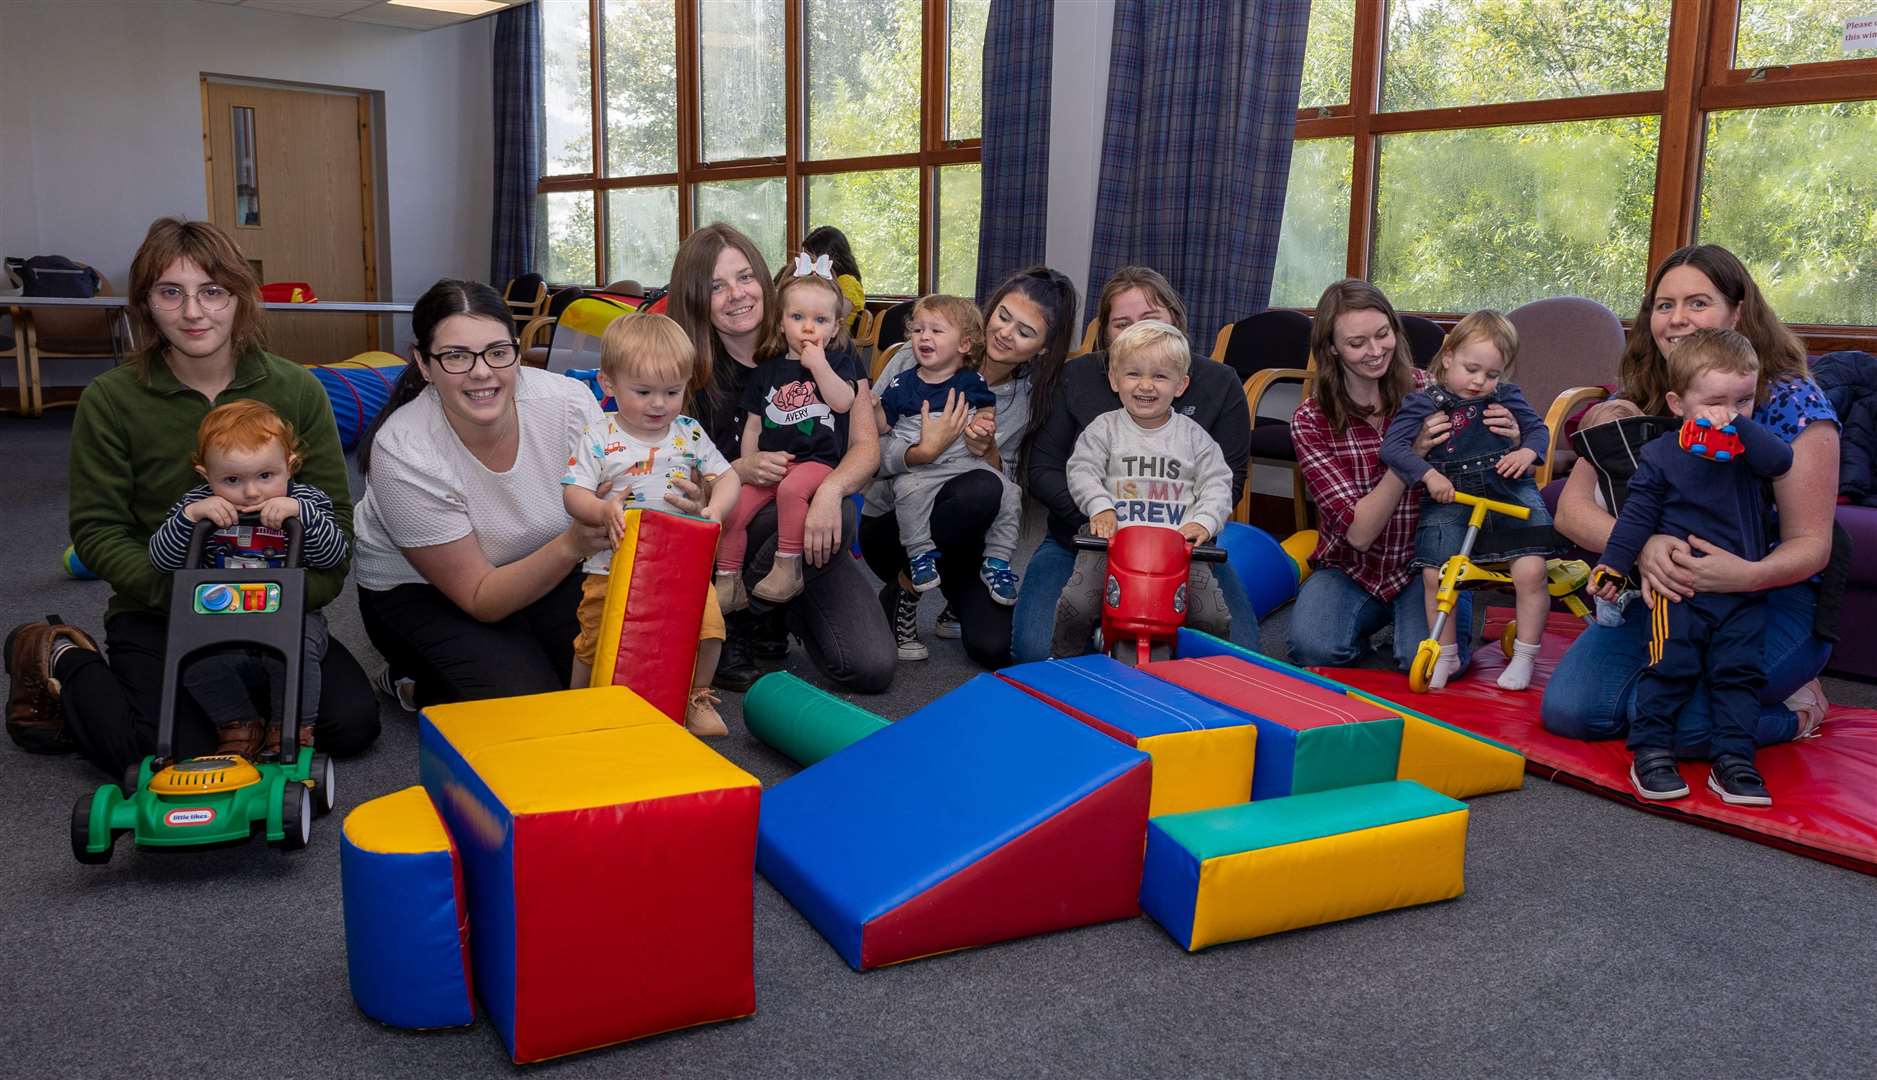 Brora Toy Library runs activities to help toddlers develop their social and motor skills and to improve their coordination. The group holds weekly sessions in Brora Community Centre.